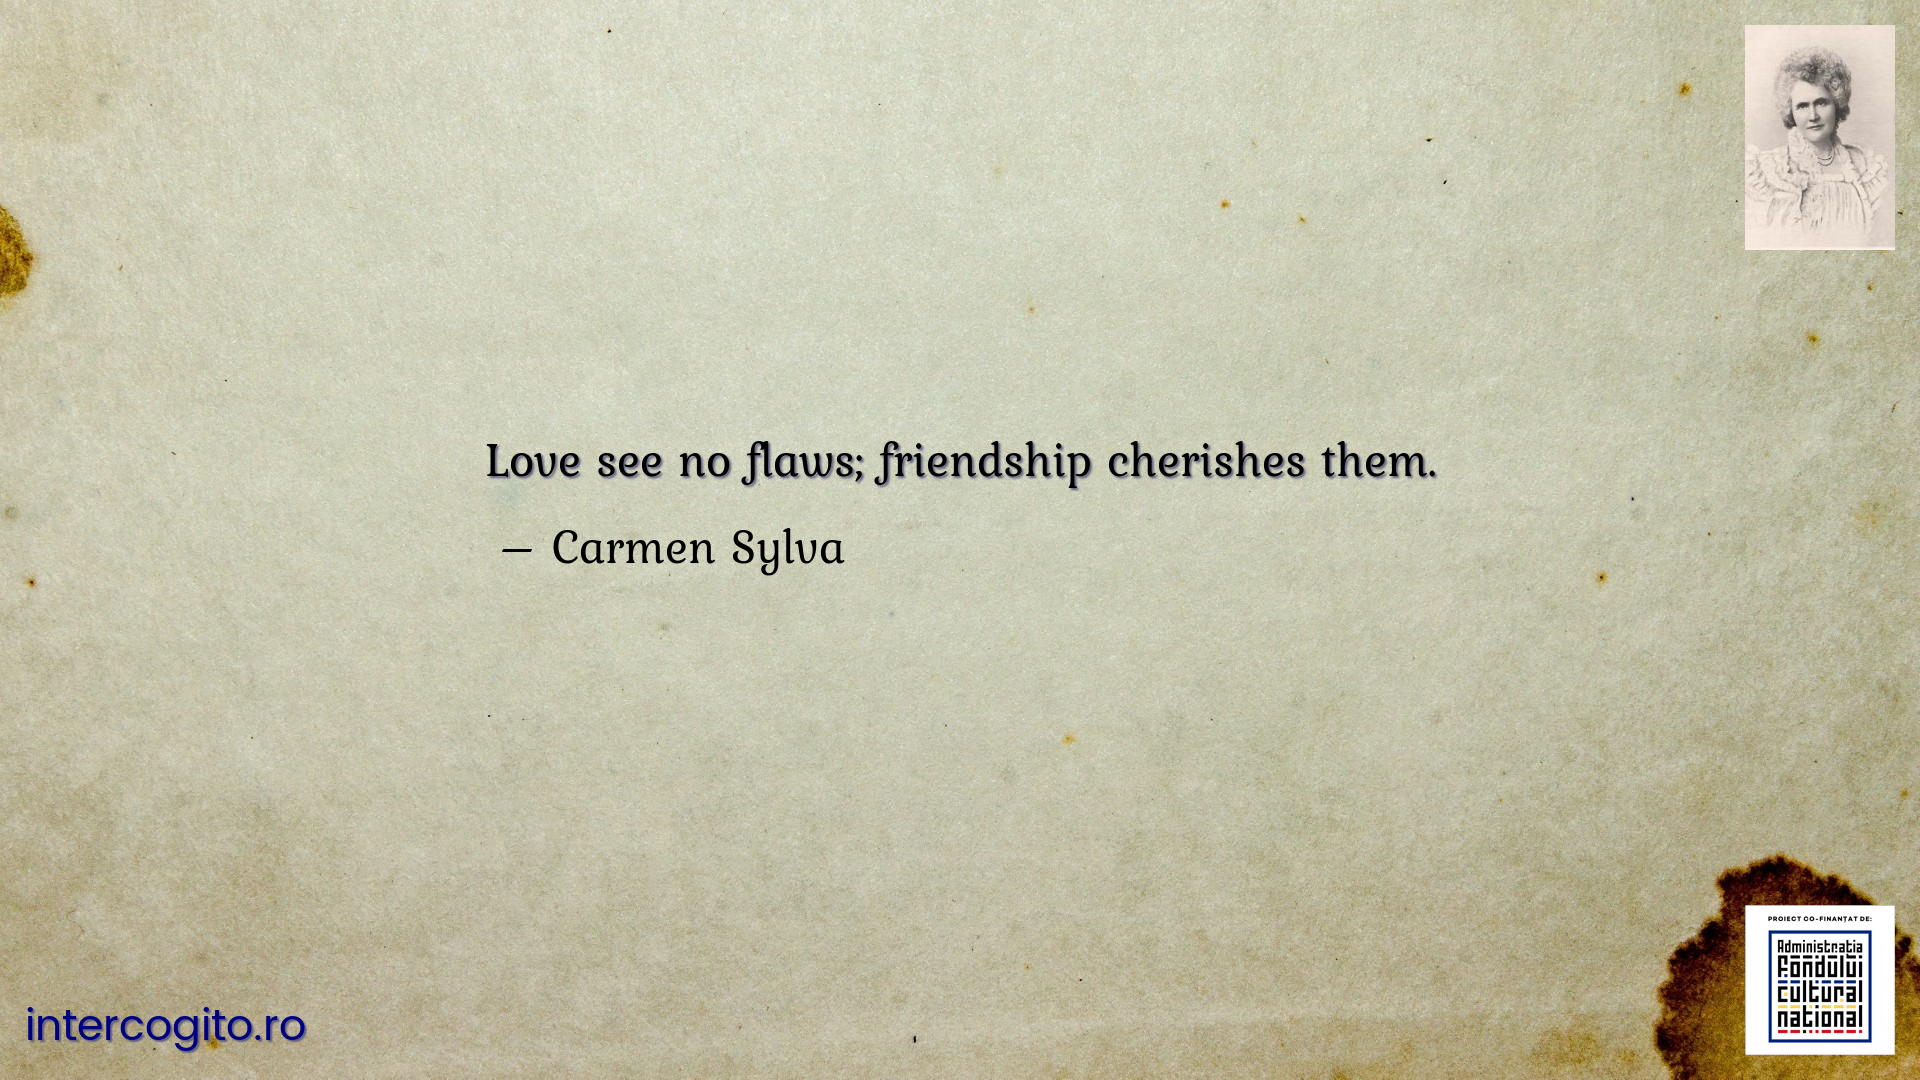 Love see no flaws; friendship cherishes them.